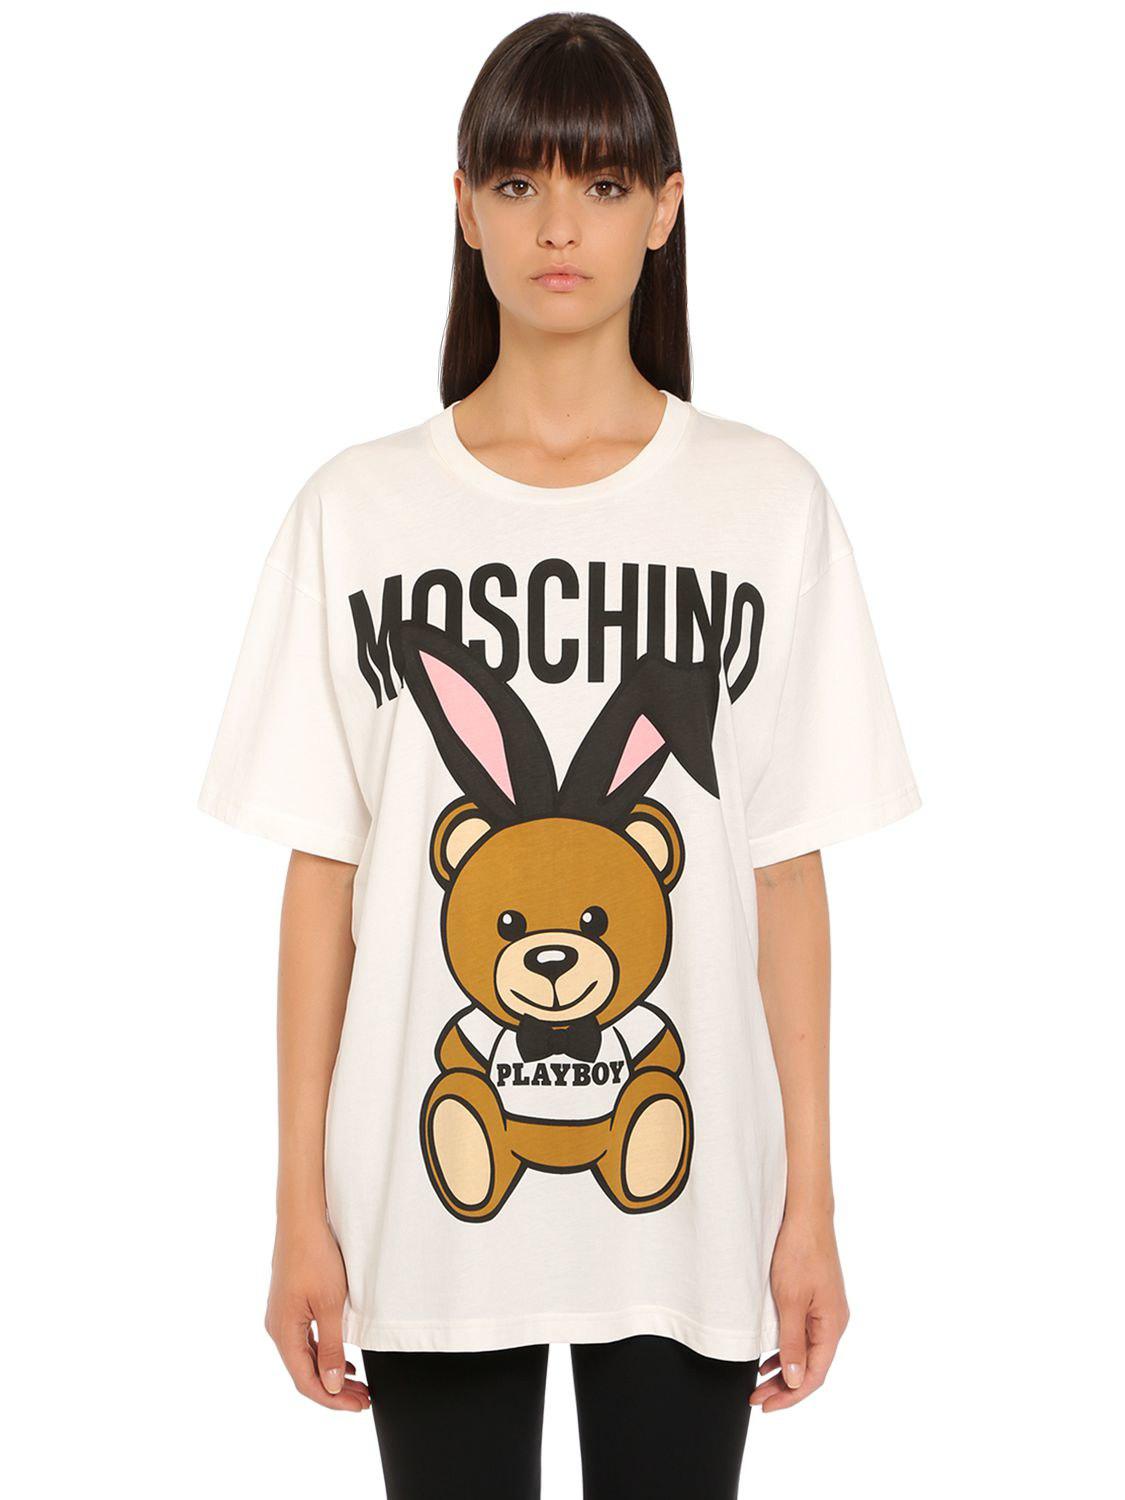 Moschino Oversized Playboy Bear Jersey T-shirt in White - Lyst